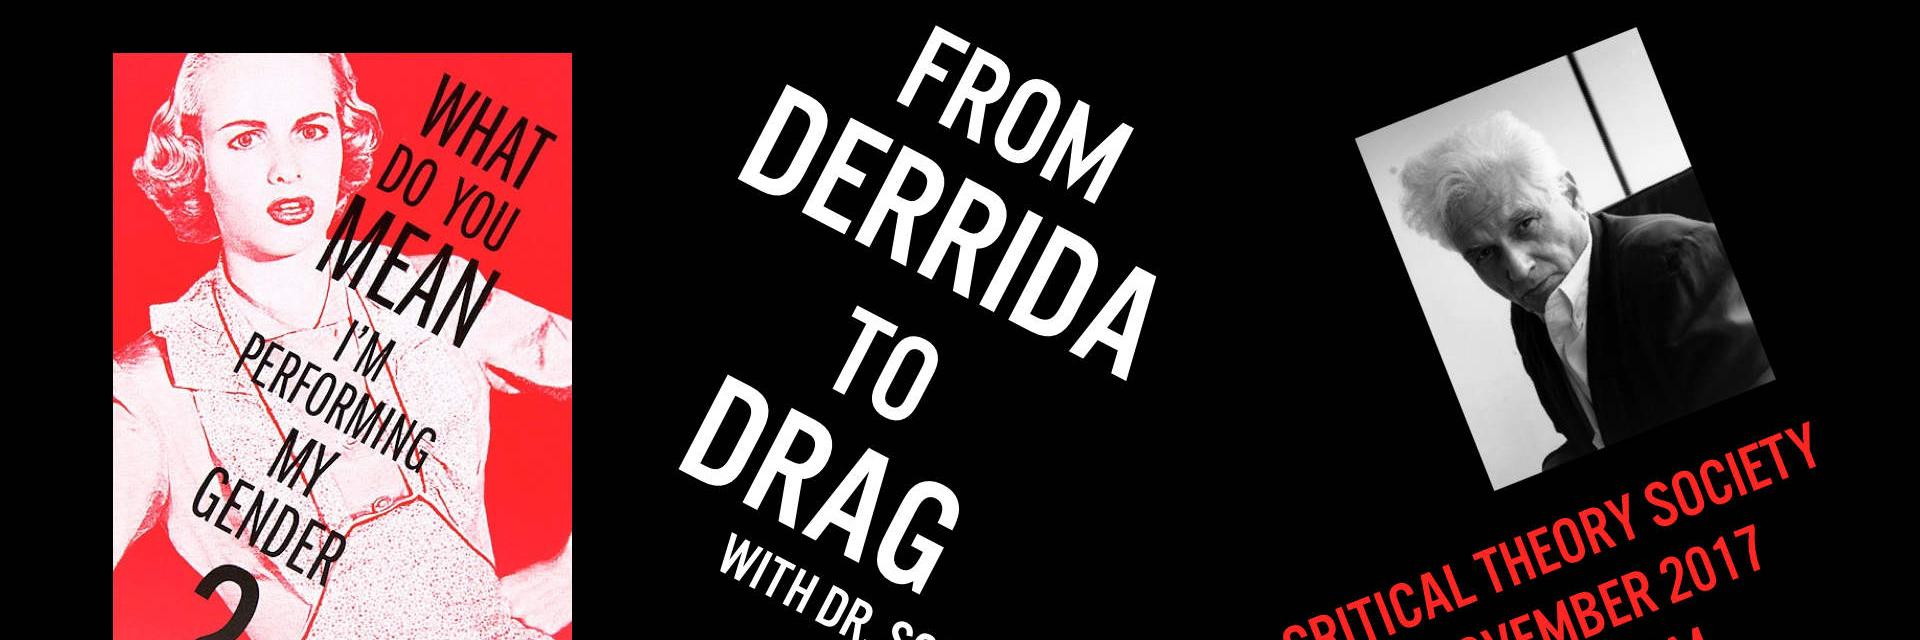 critical theory society presentation | dr nikkila| from derrida to drag | november 6 2017 from 10-11am in mw264